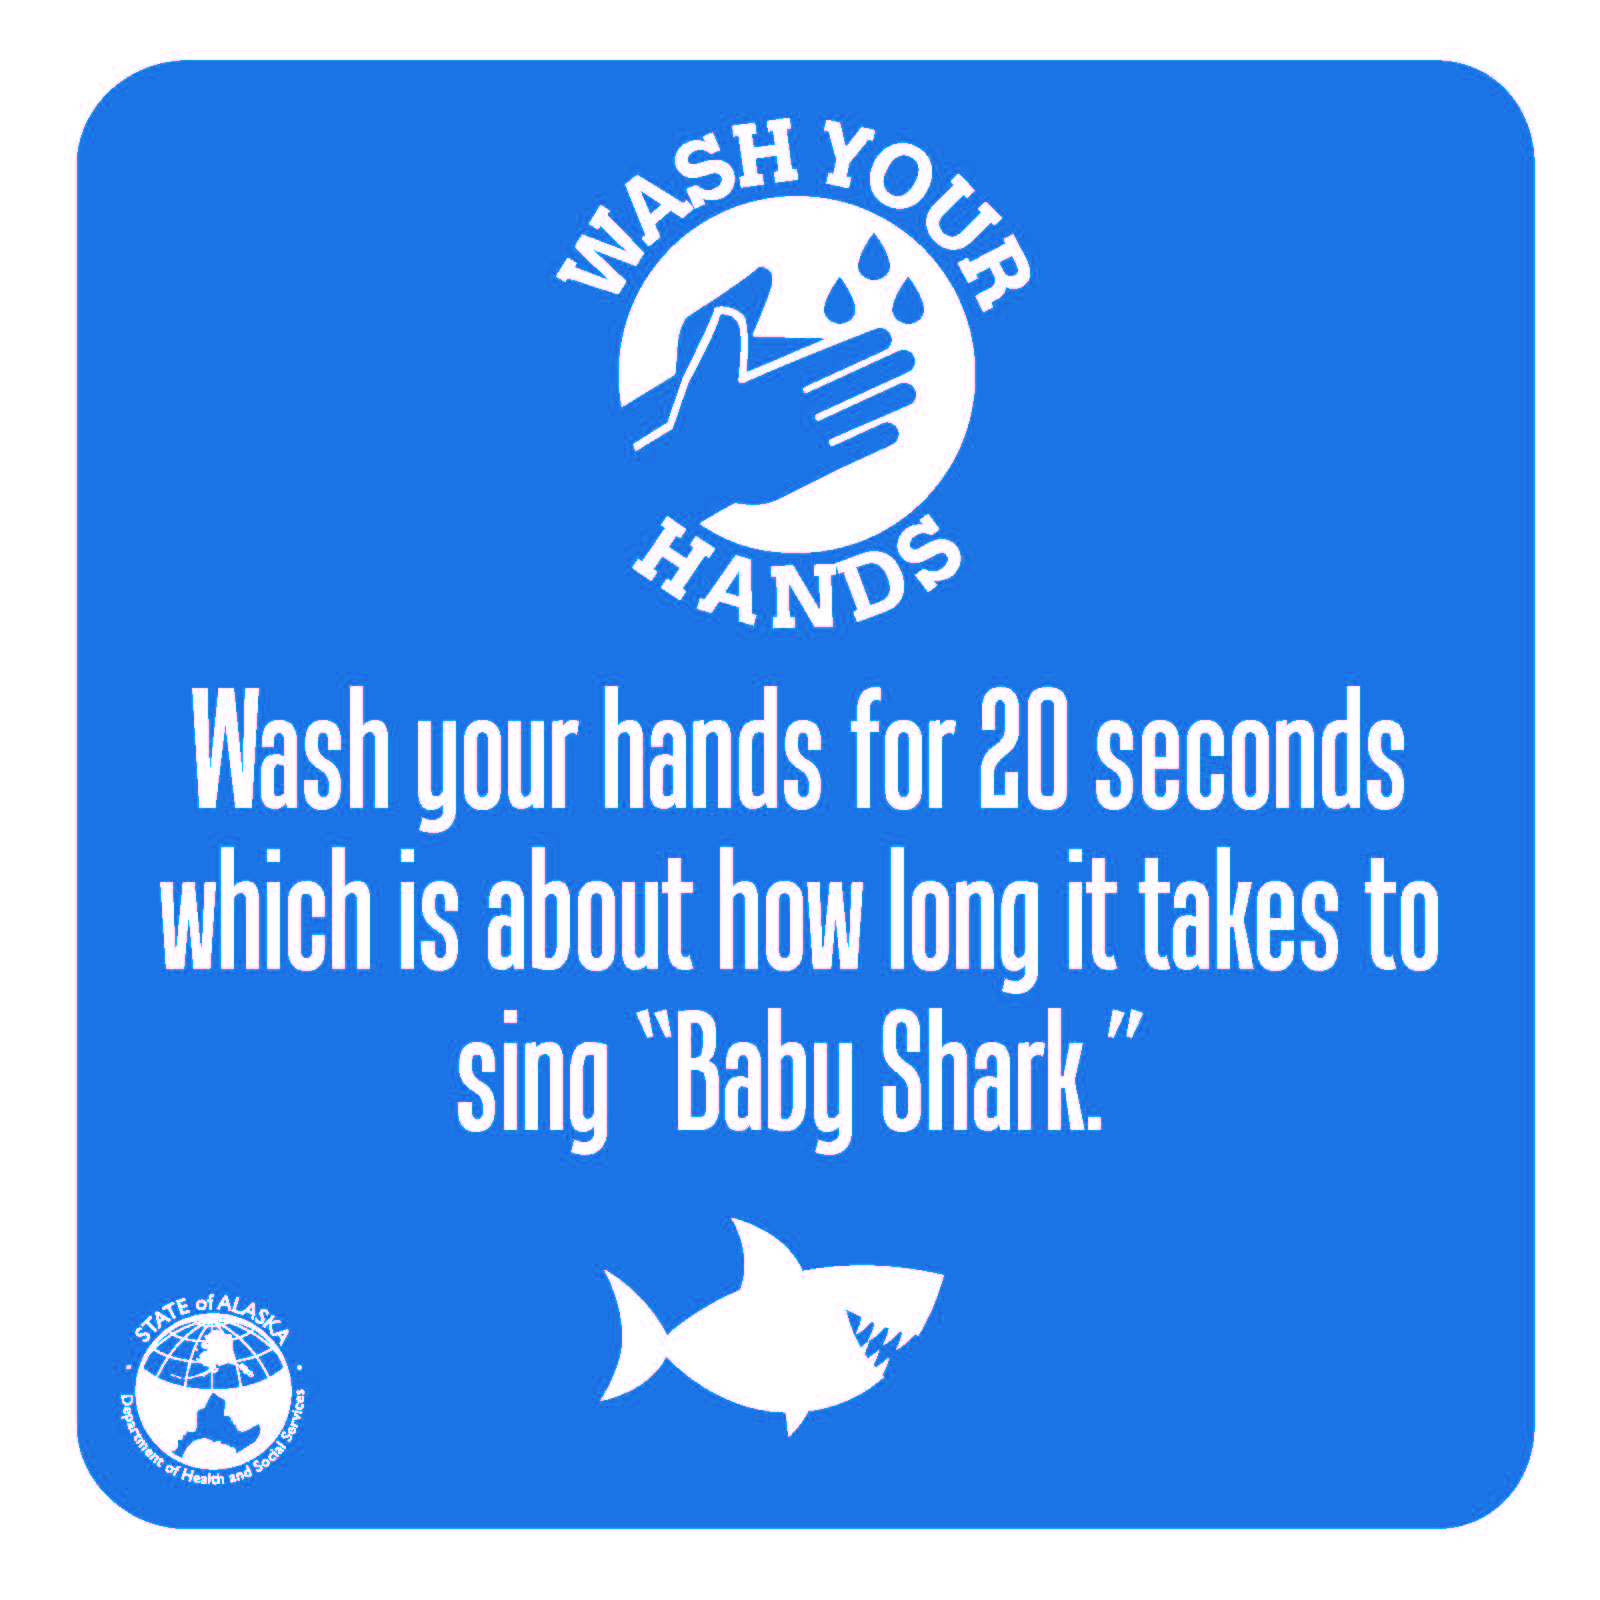 Wash your hands: Wash your hands for 20 seconds, which is about how long it takes to sing "Baby Shark."